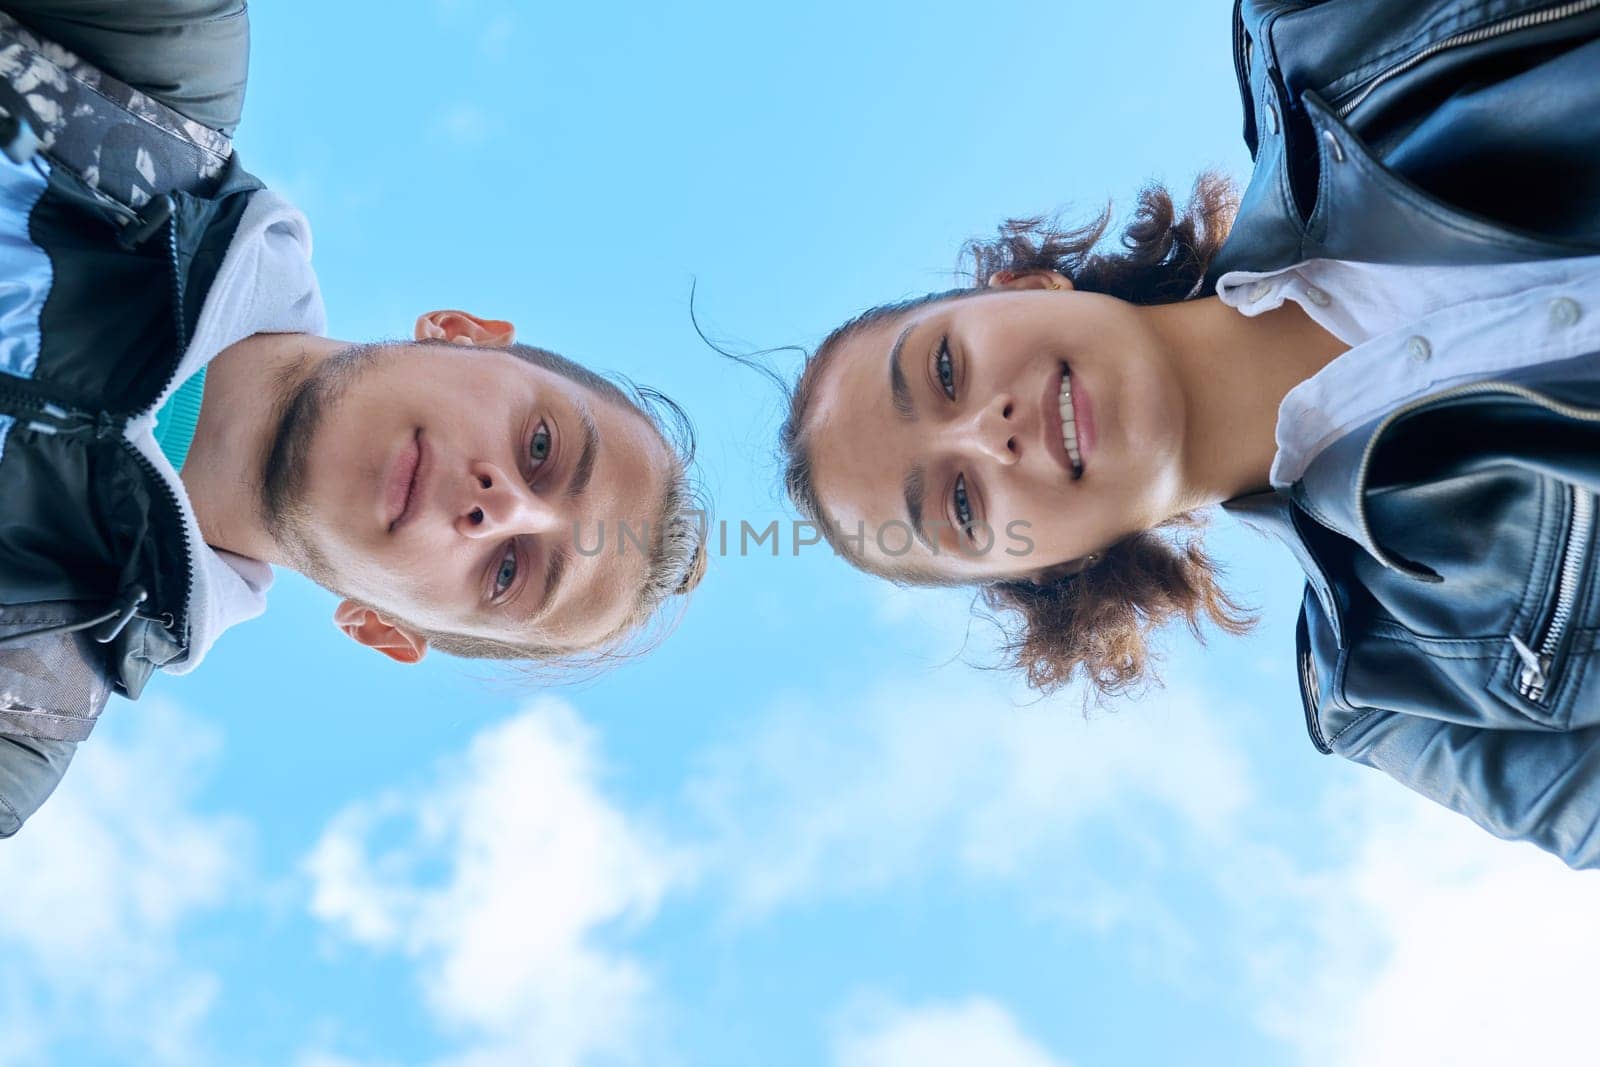 Teenage guy and girl smiling looking down at camera, blue sky background by VH-studio